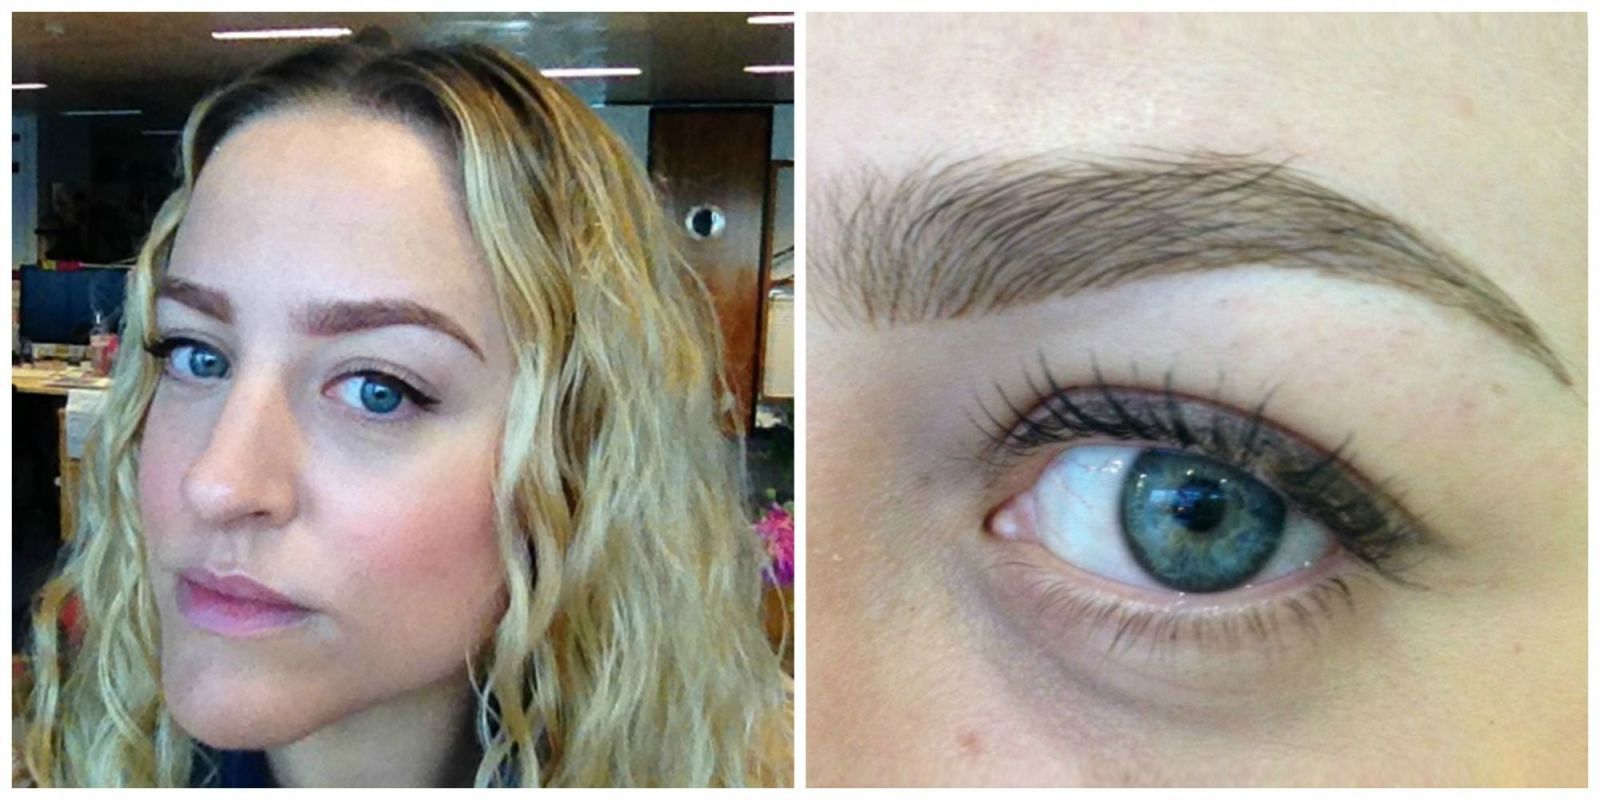 Microblading vs. Eyebrow Tattooing: 3 Key Differences and Why They Matter